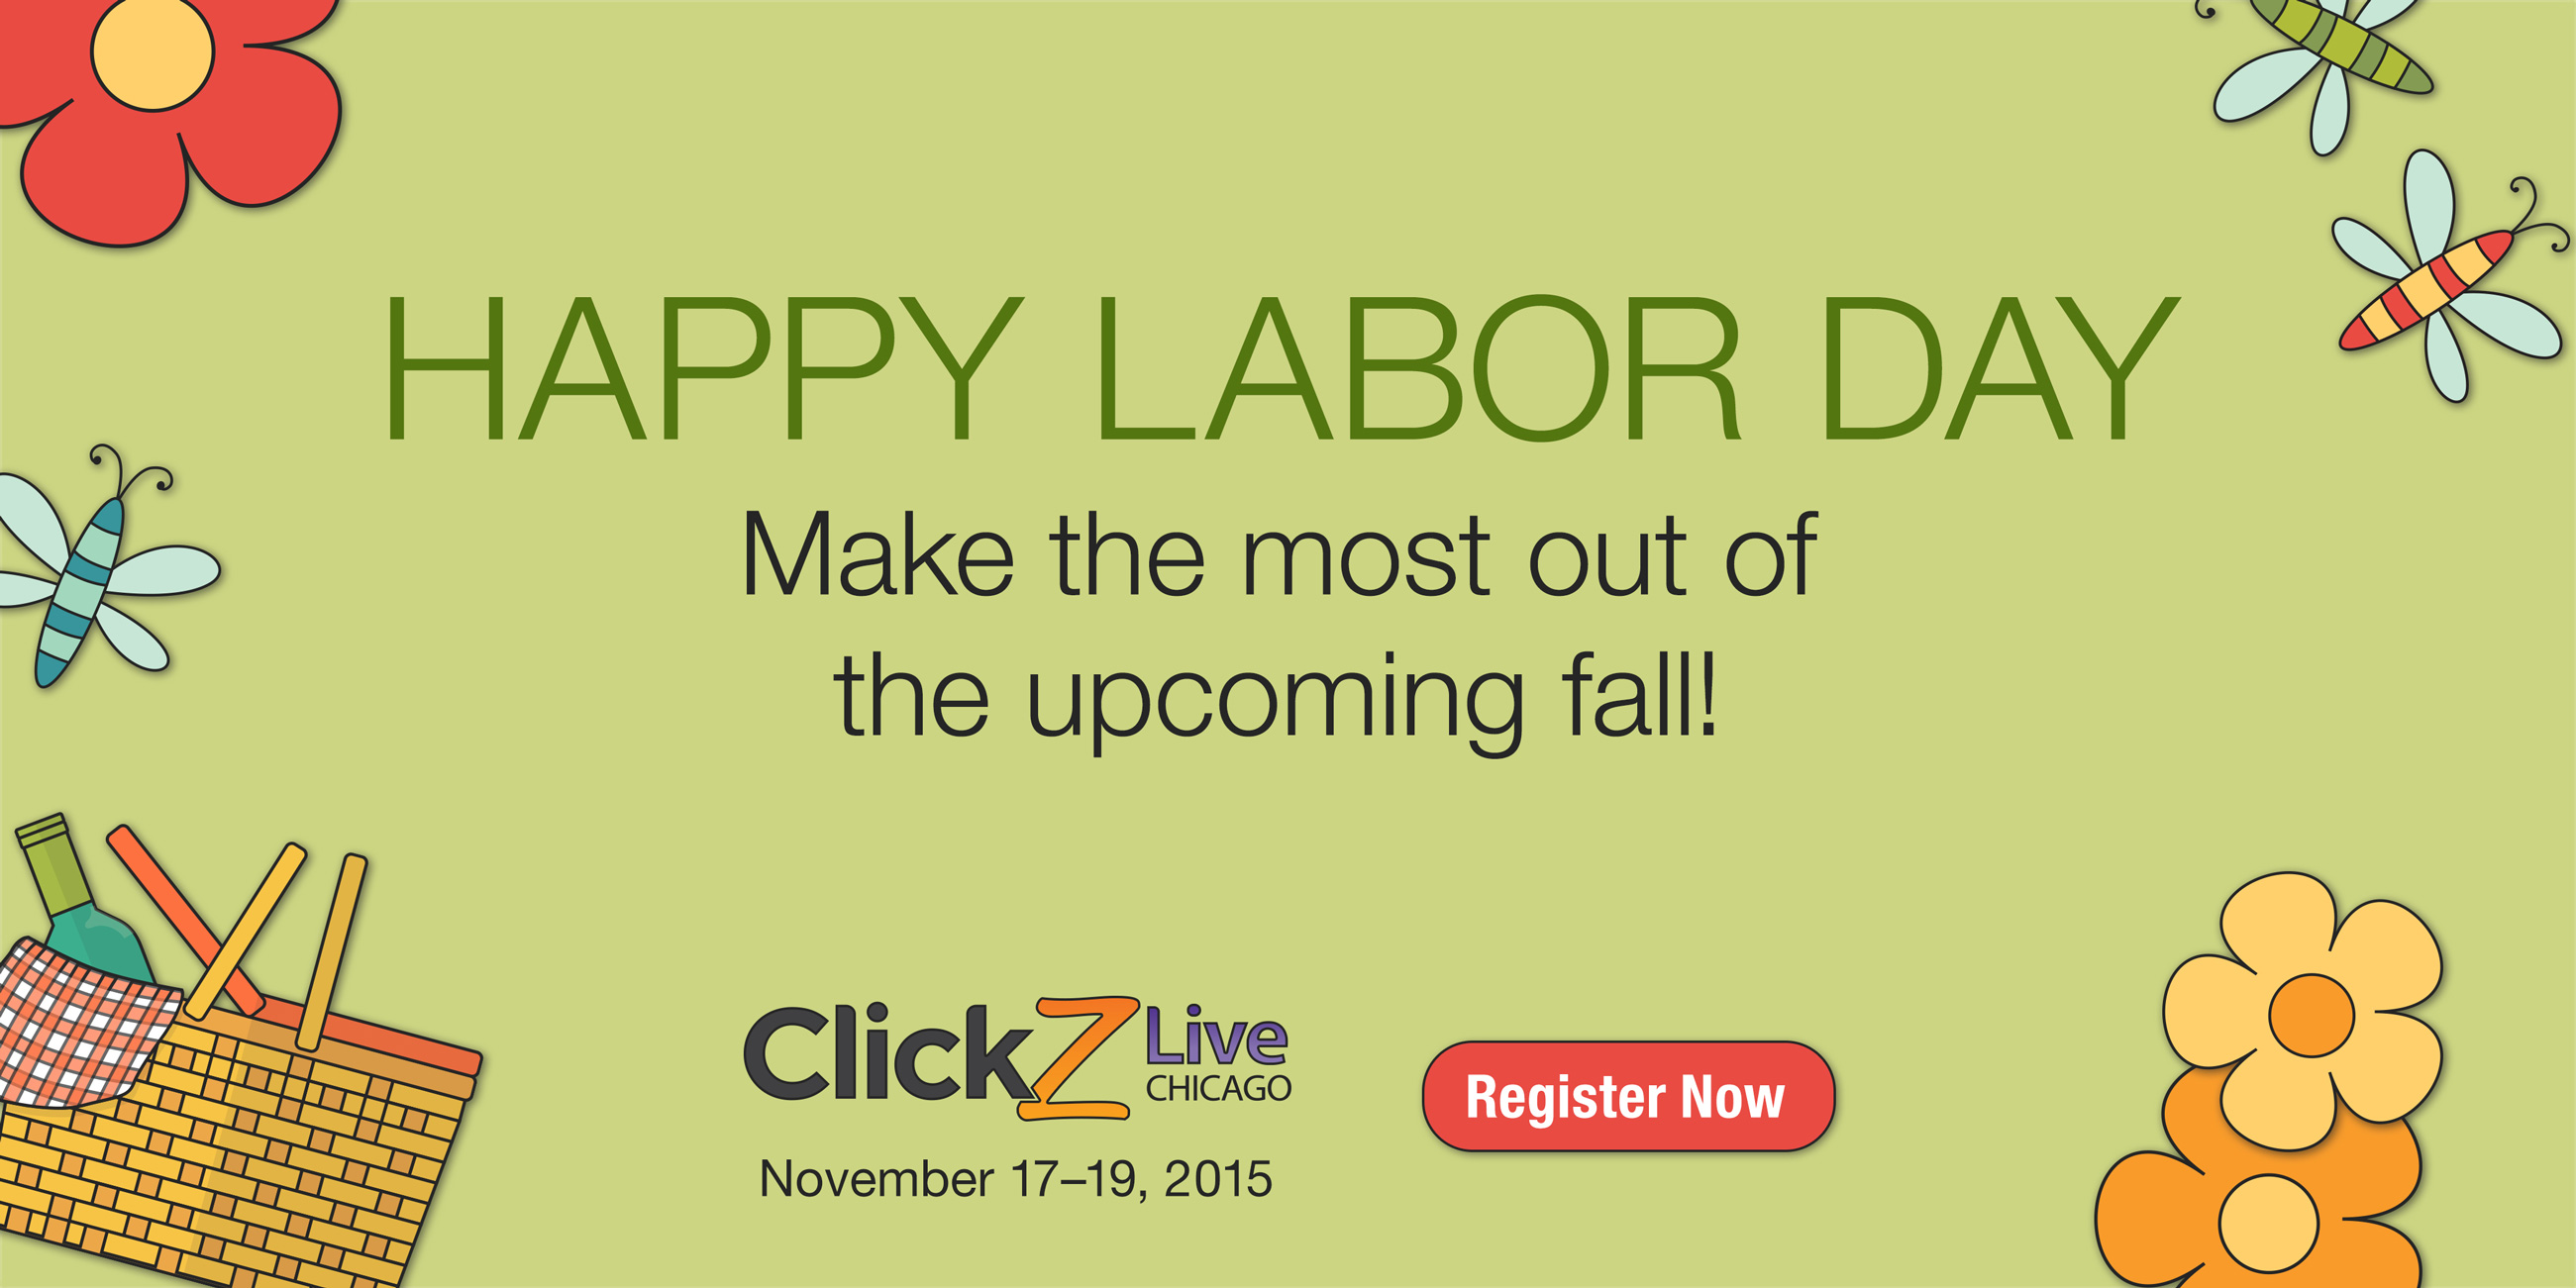 Display ad and social media image at 2:1 ratio for the ClickZ Conference in  Chicago, with a Labor Day theme. Text is dark green and dark grey; background is light green. On the edges of the image are illustrations of dragonflies, flowers, and a picnic basket in red, green, yellow, orange, and blue.